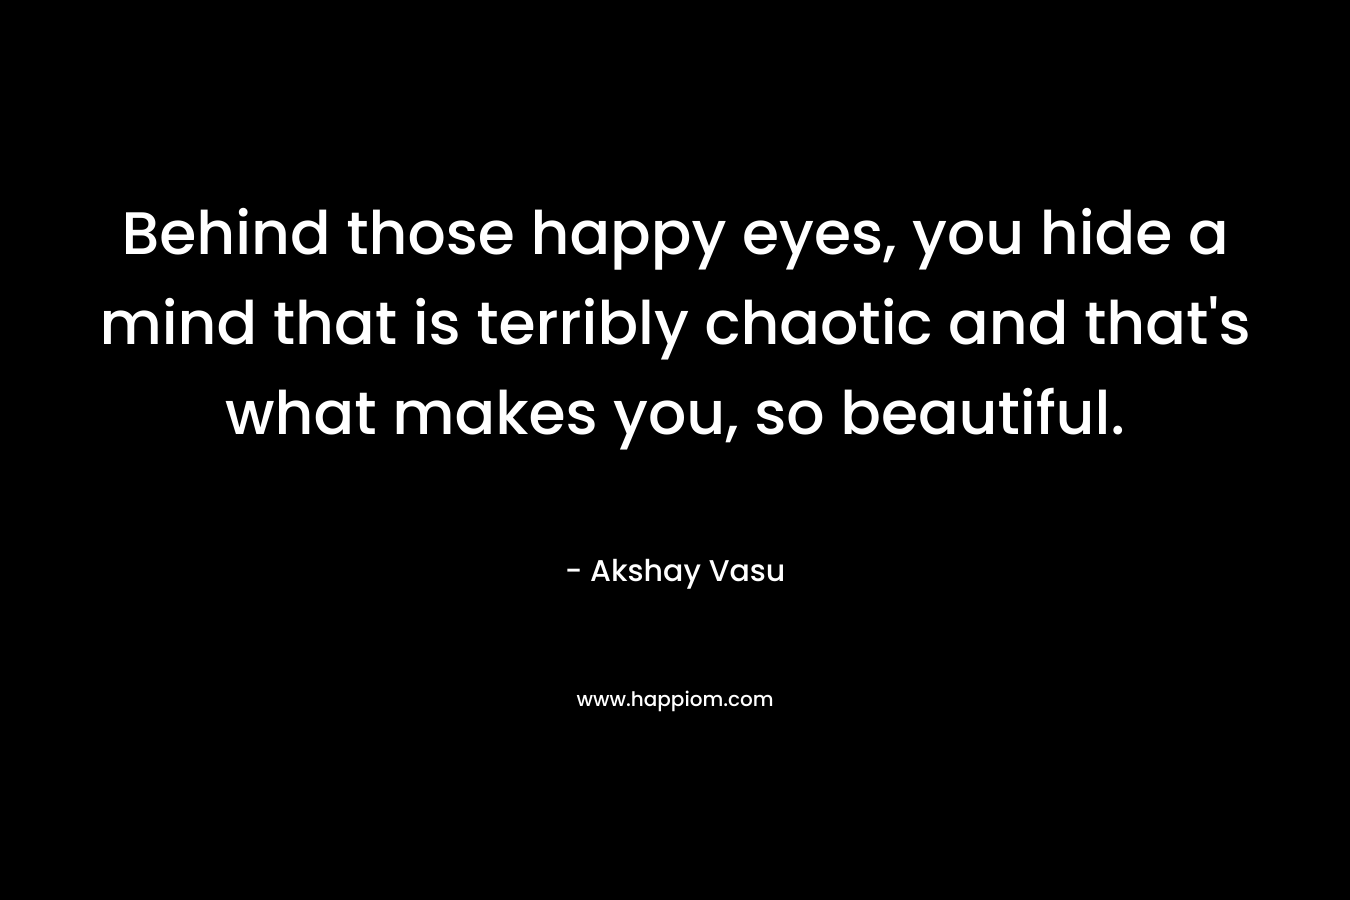 Behind those happy eyes, you hide a mind that is terribly chaotic and that's what makes you, so beautiful.